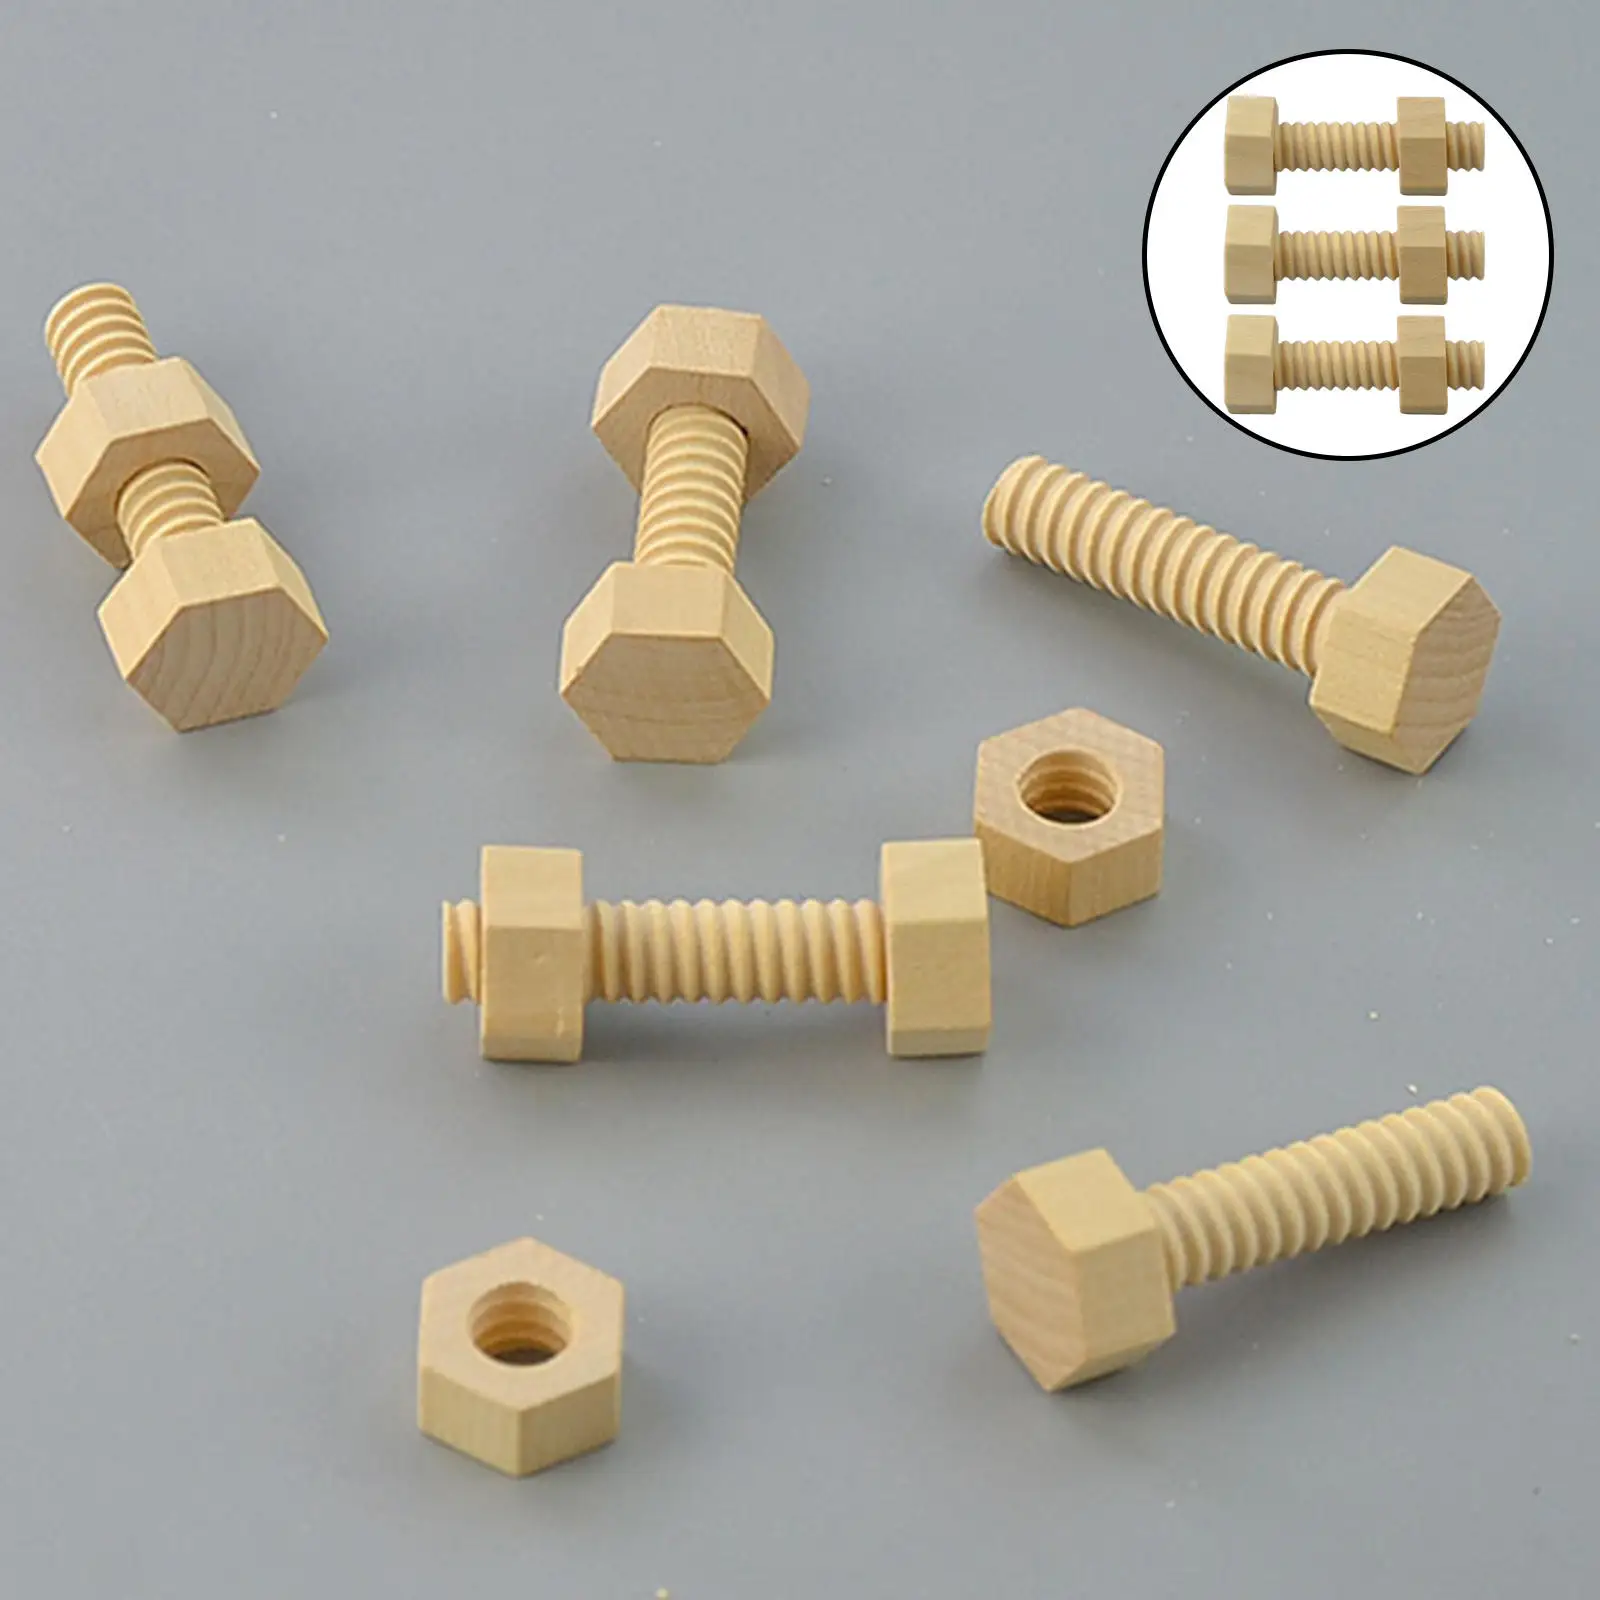 Wooden Screw Nut Assembling Toy Montessori Hands-On Teaching Aid Nesting Gift Game Educational Toys Wood Screw Nut Toy for Baby